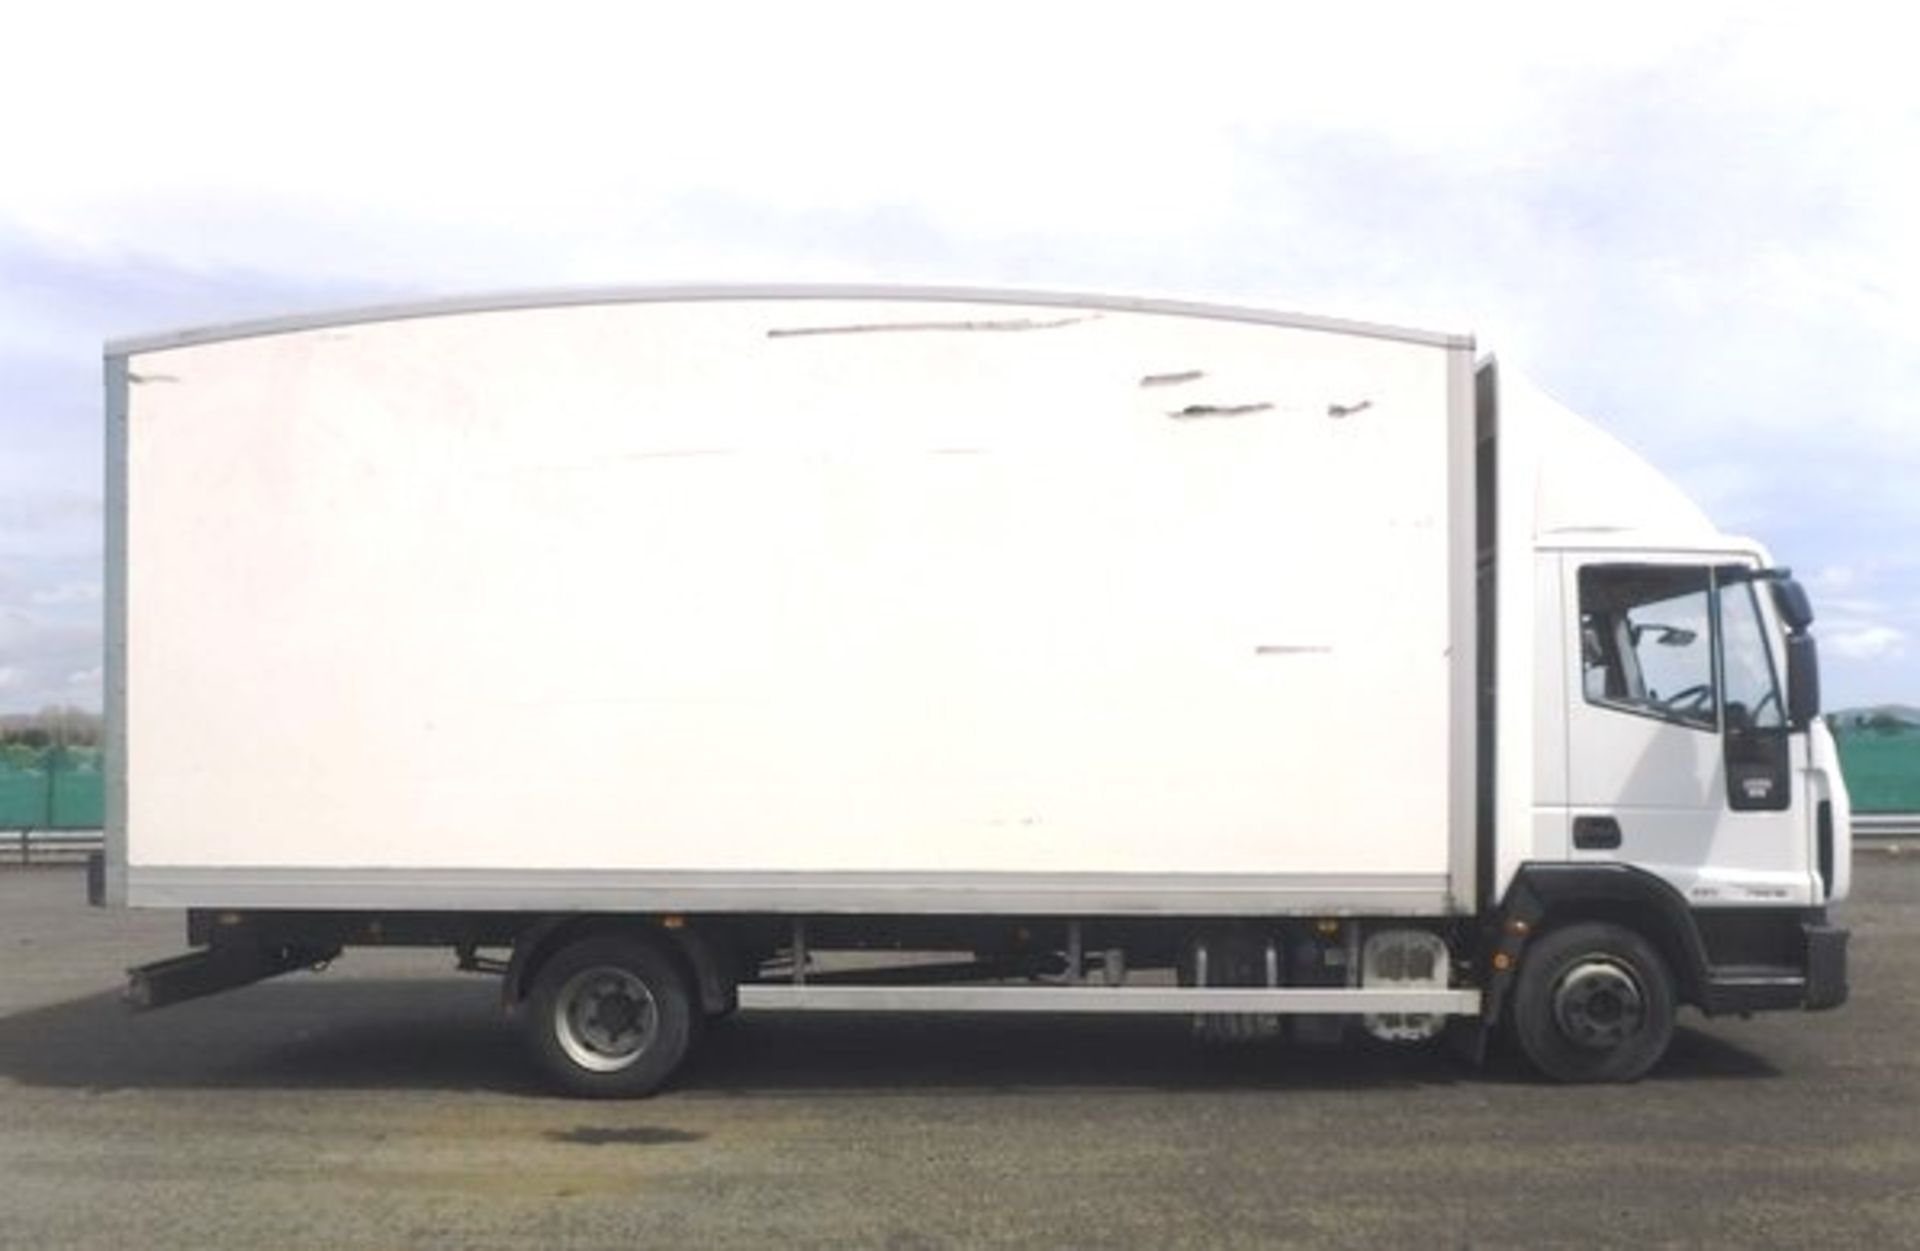 IVECO MODEL EUROCARGO (MY 2008) - 3920cc - Image 8 of 27